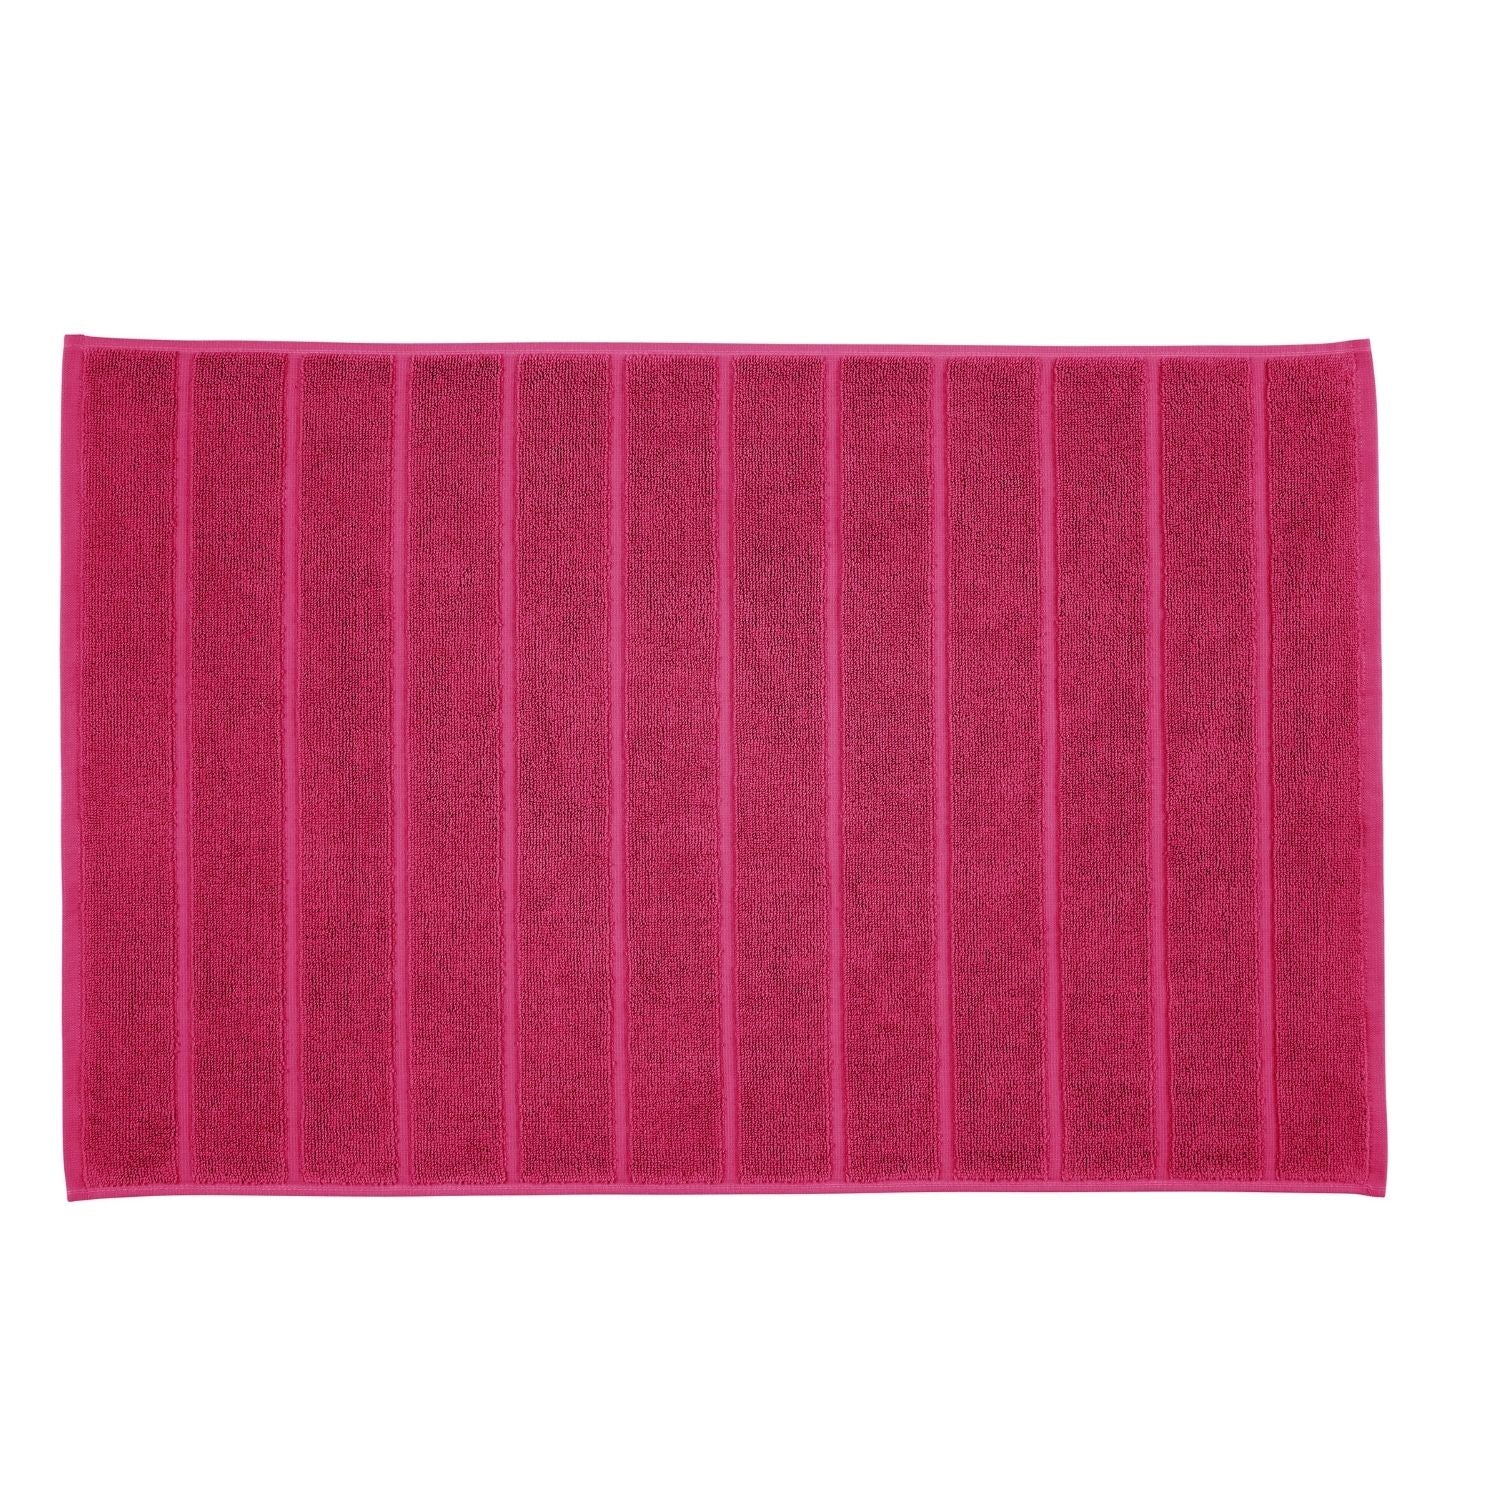 Christy Chroma Bath Mat - Orchid 1 Shaws Department Stores